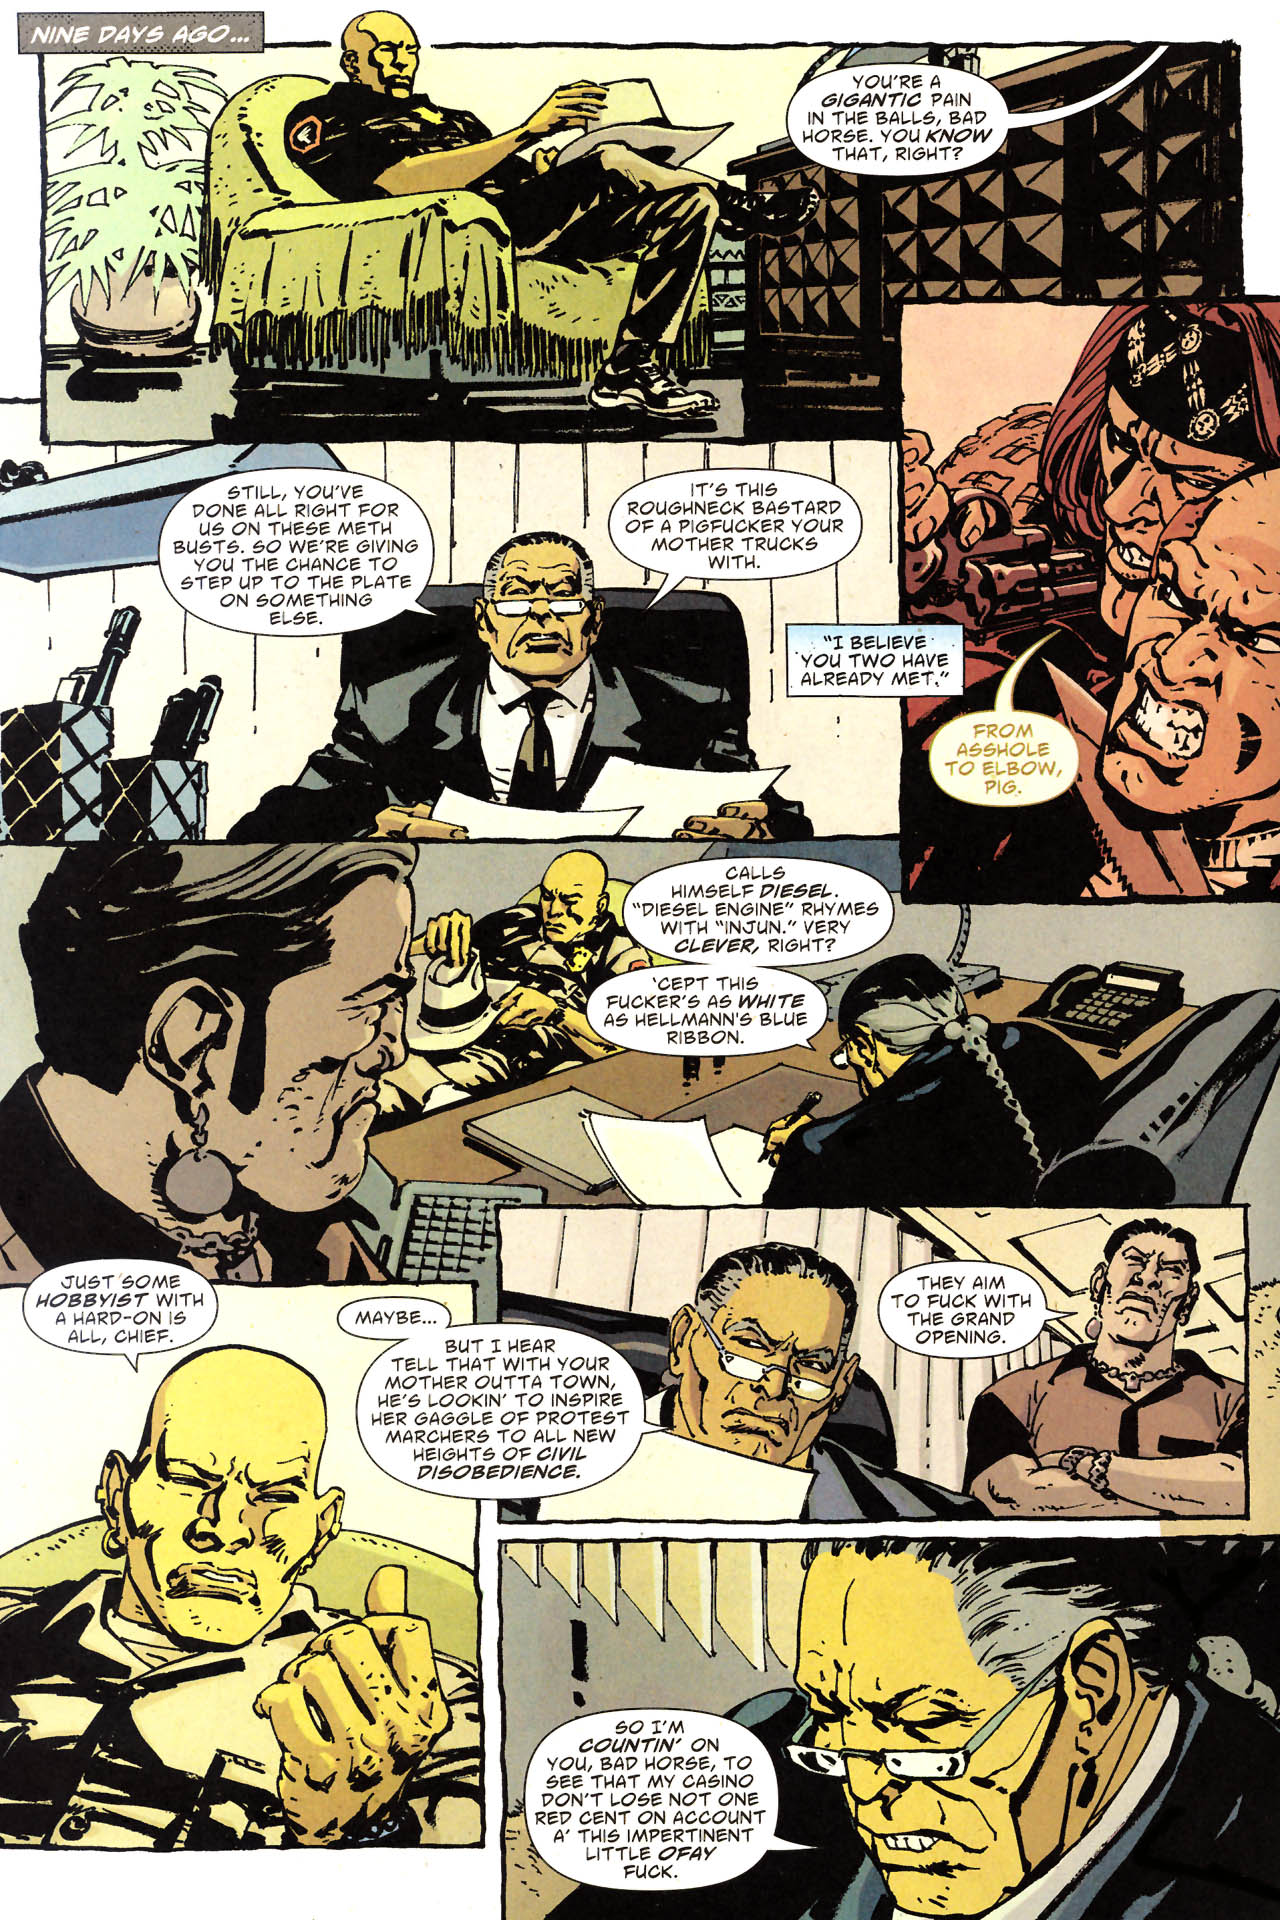 Scalped #6 - Casino Boogie, Part 1 of 6: The Man Who Fights the Bull